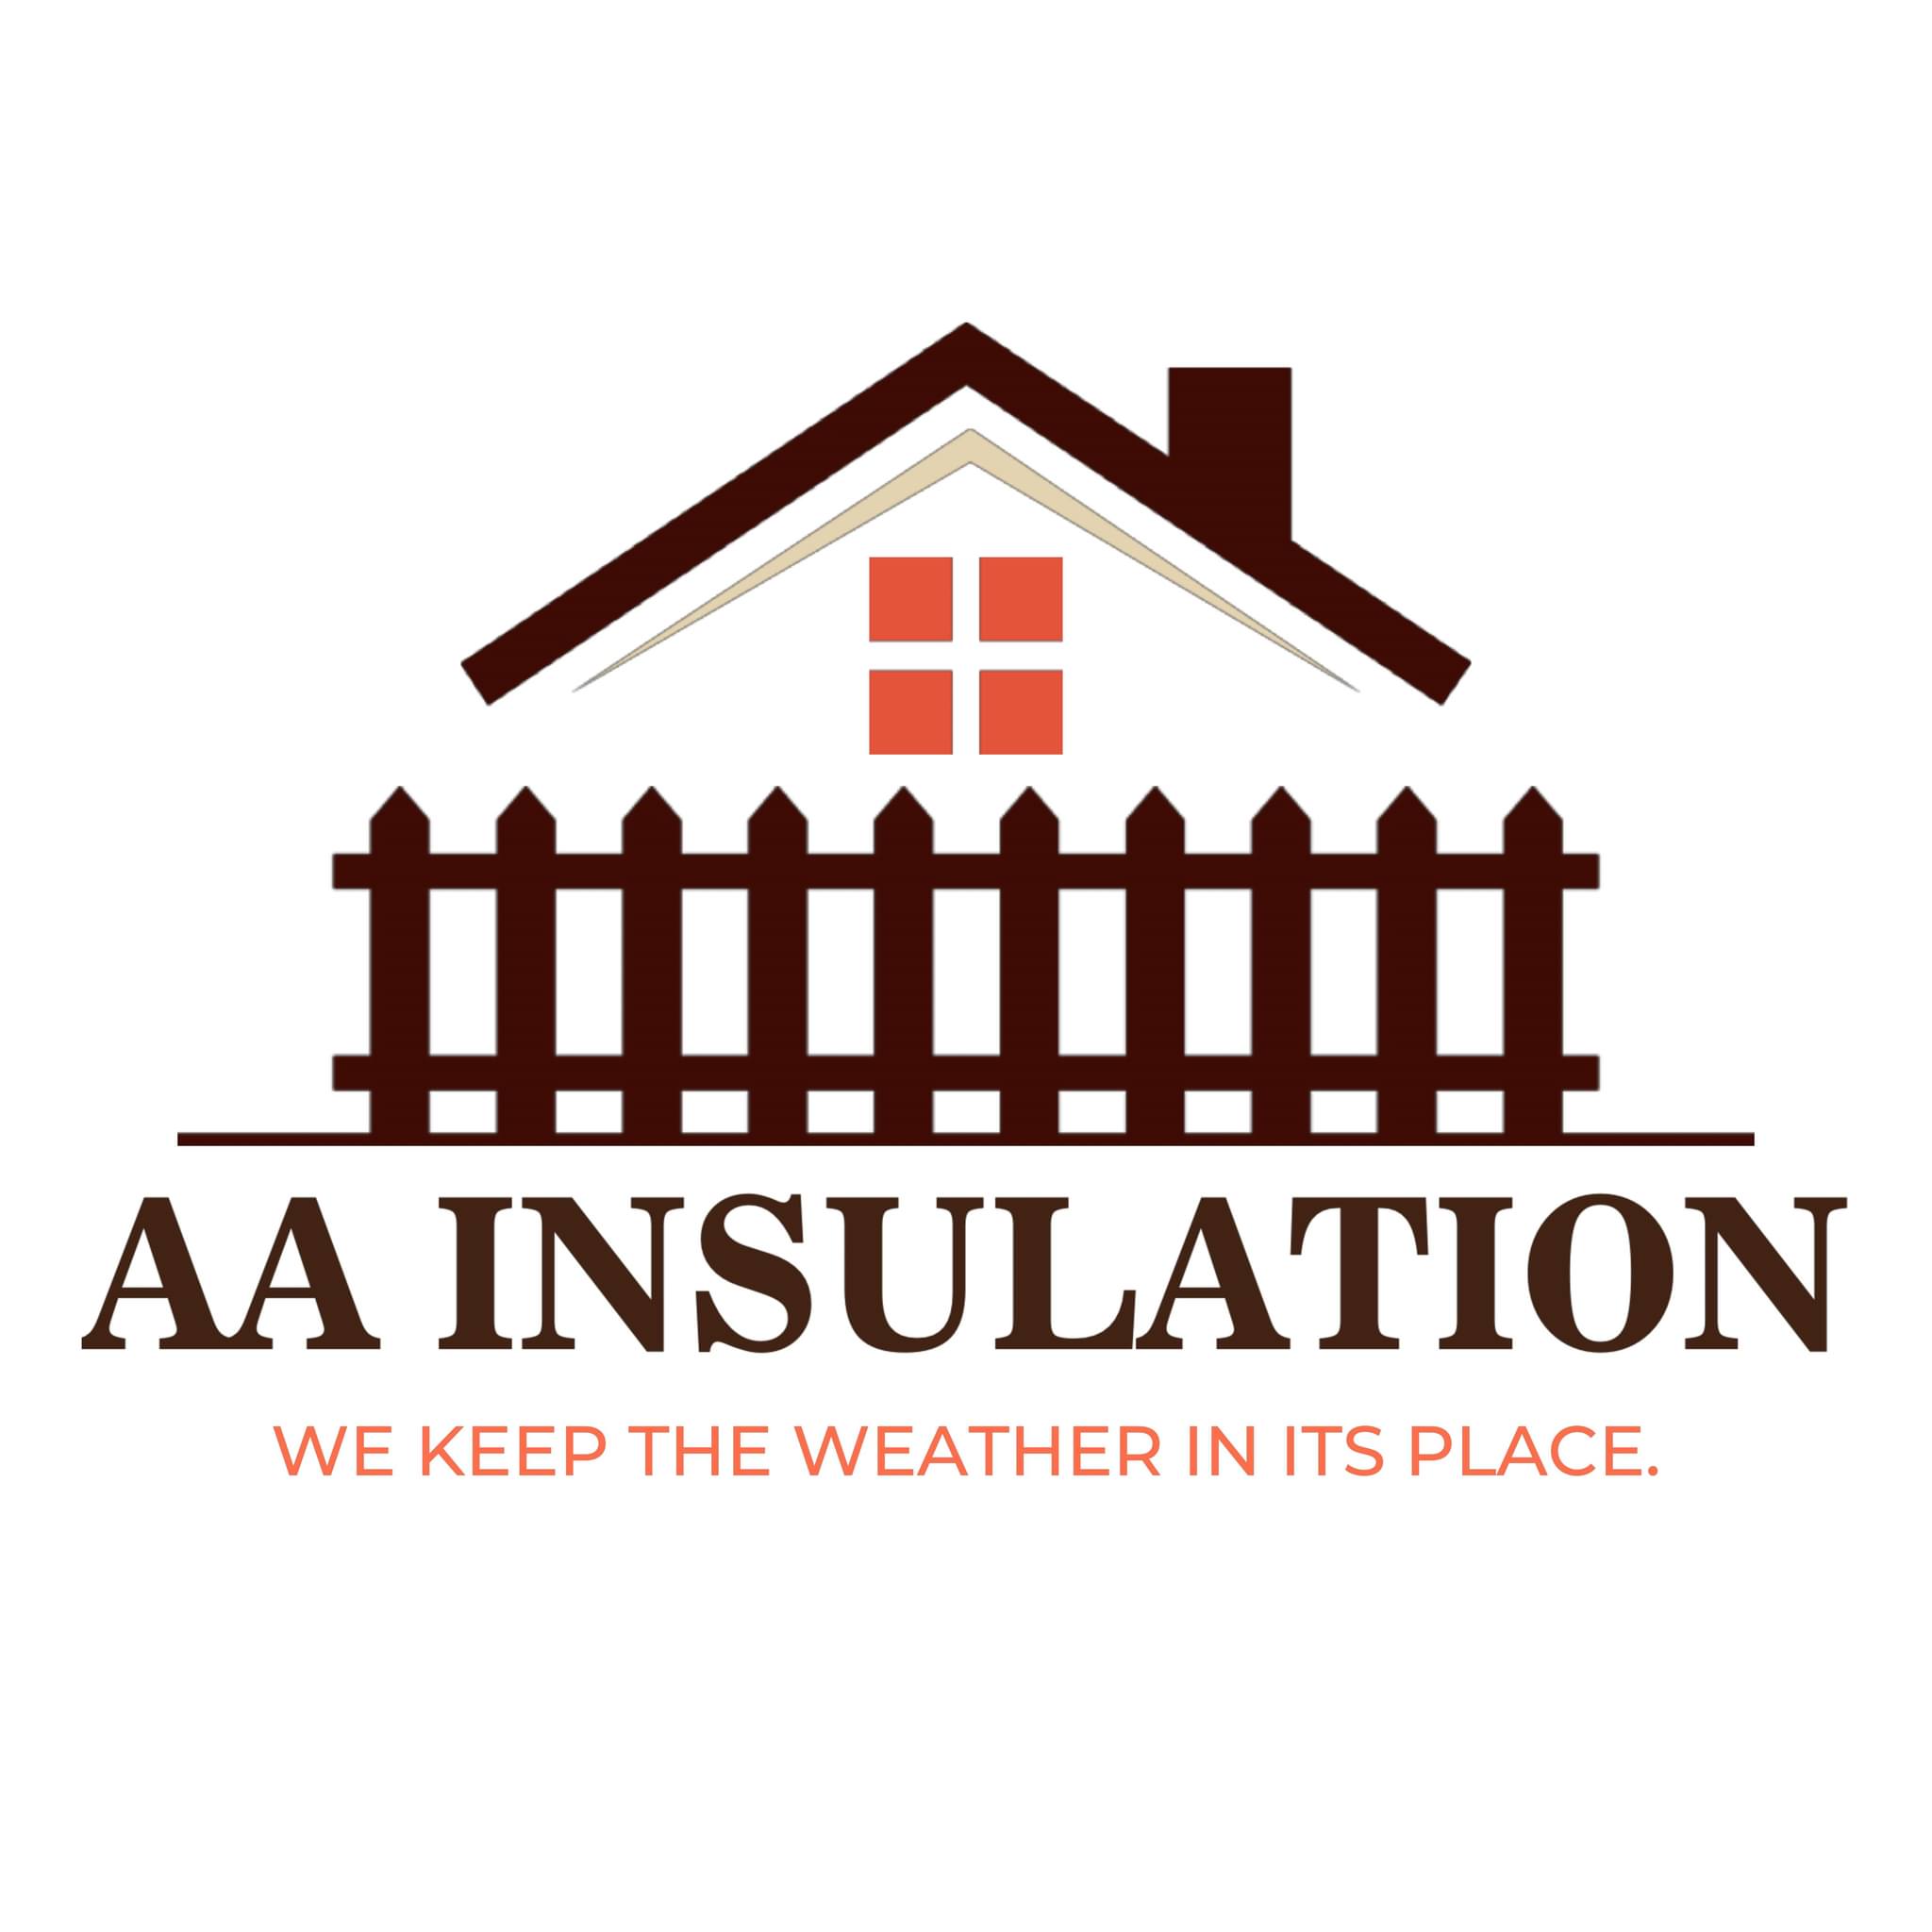 AA Insulation | Insulation Services Melbourne